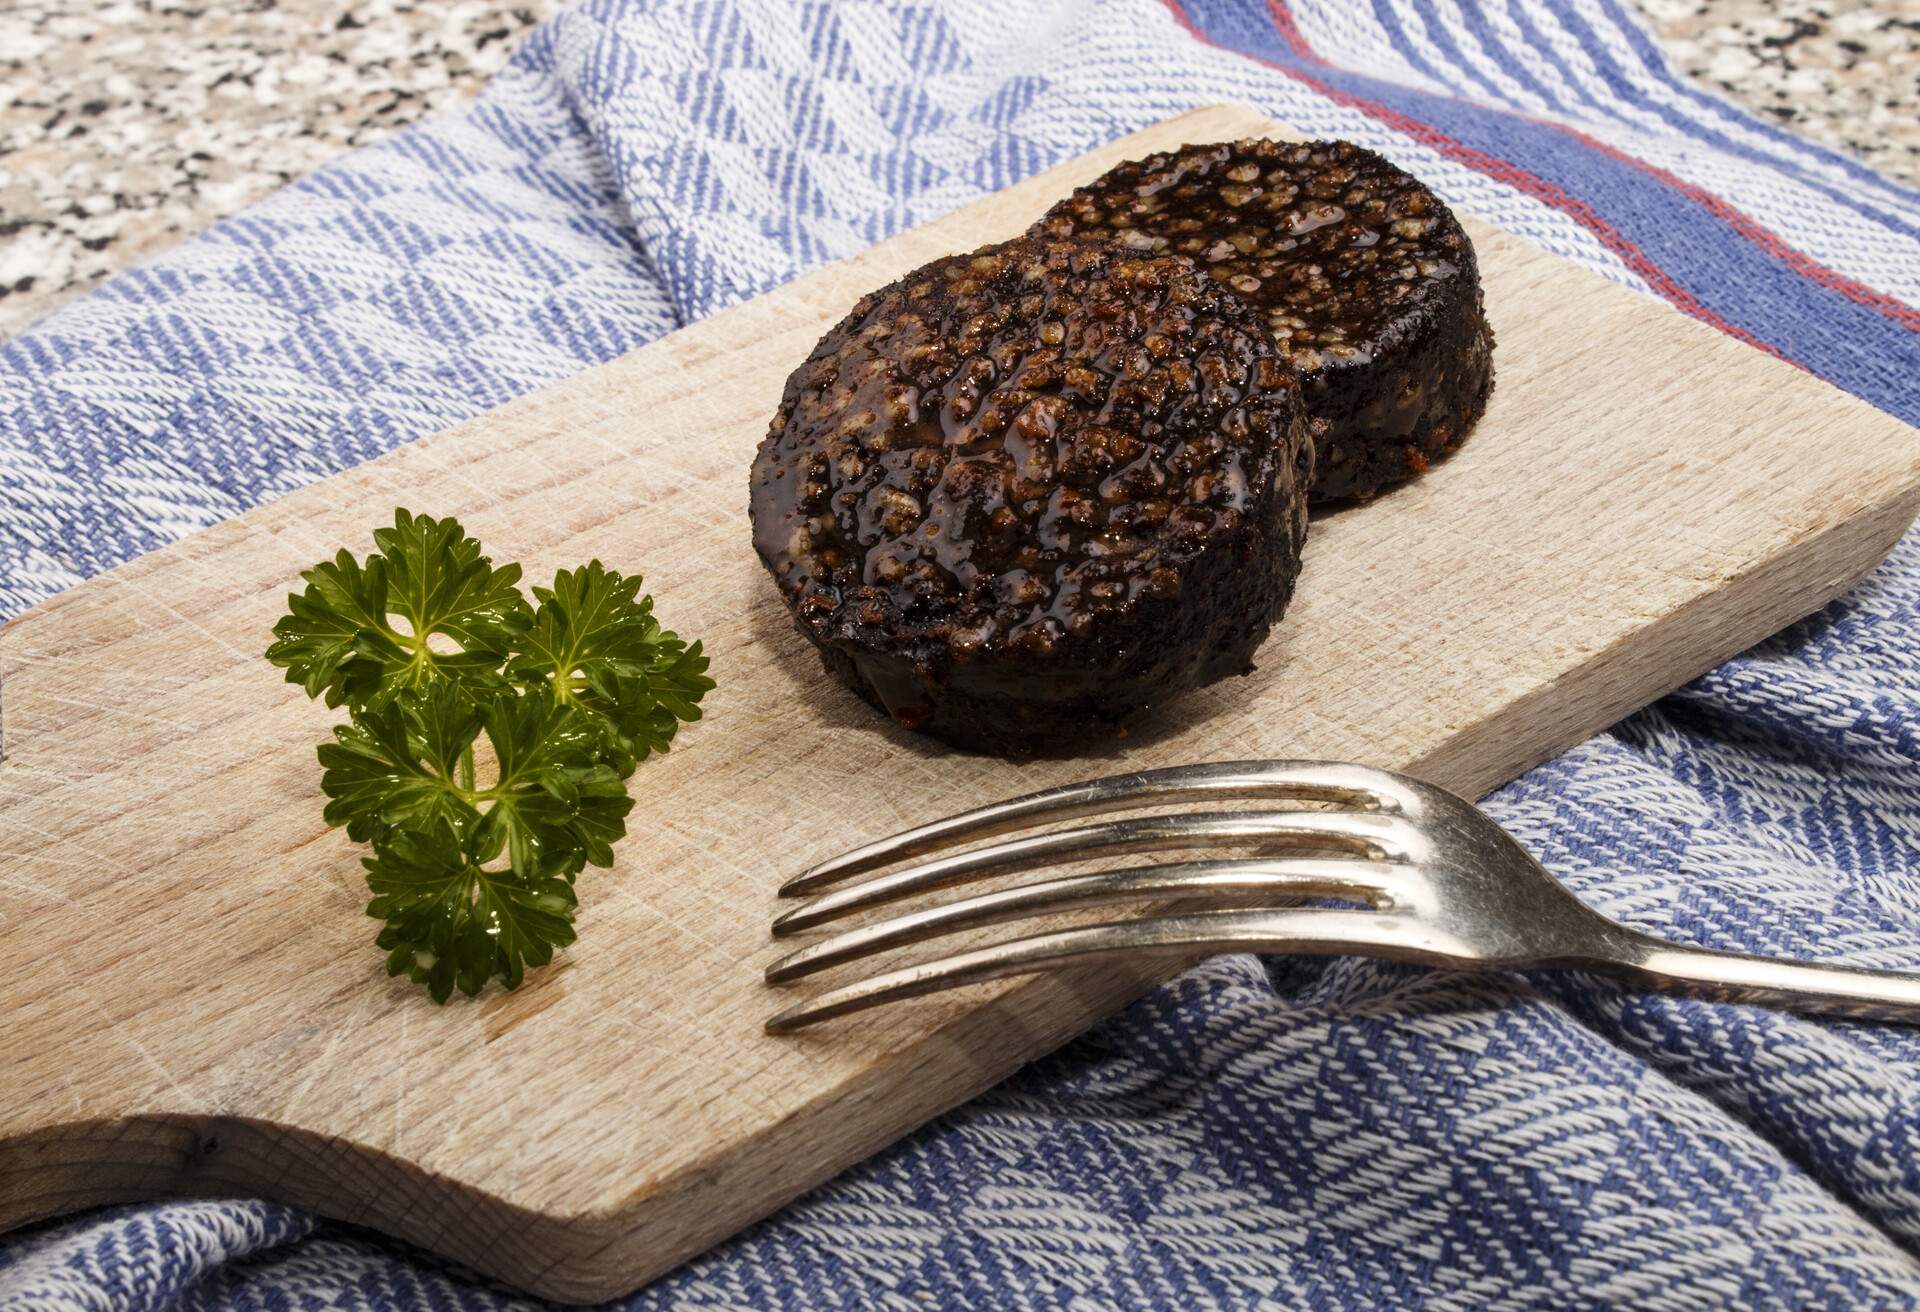 grilled irish black pudding made with oatmeal on a wooden board with knife and parsley